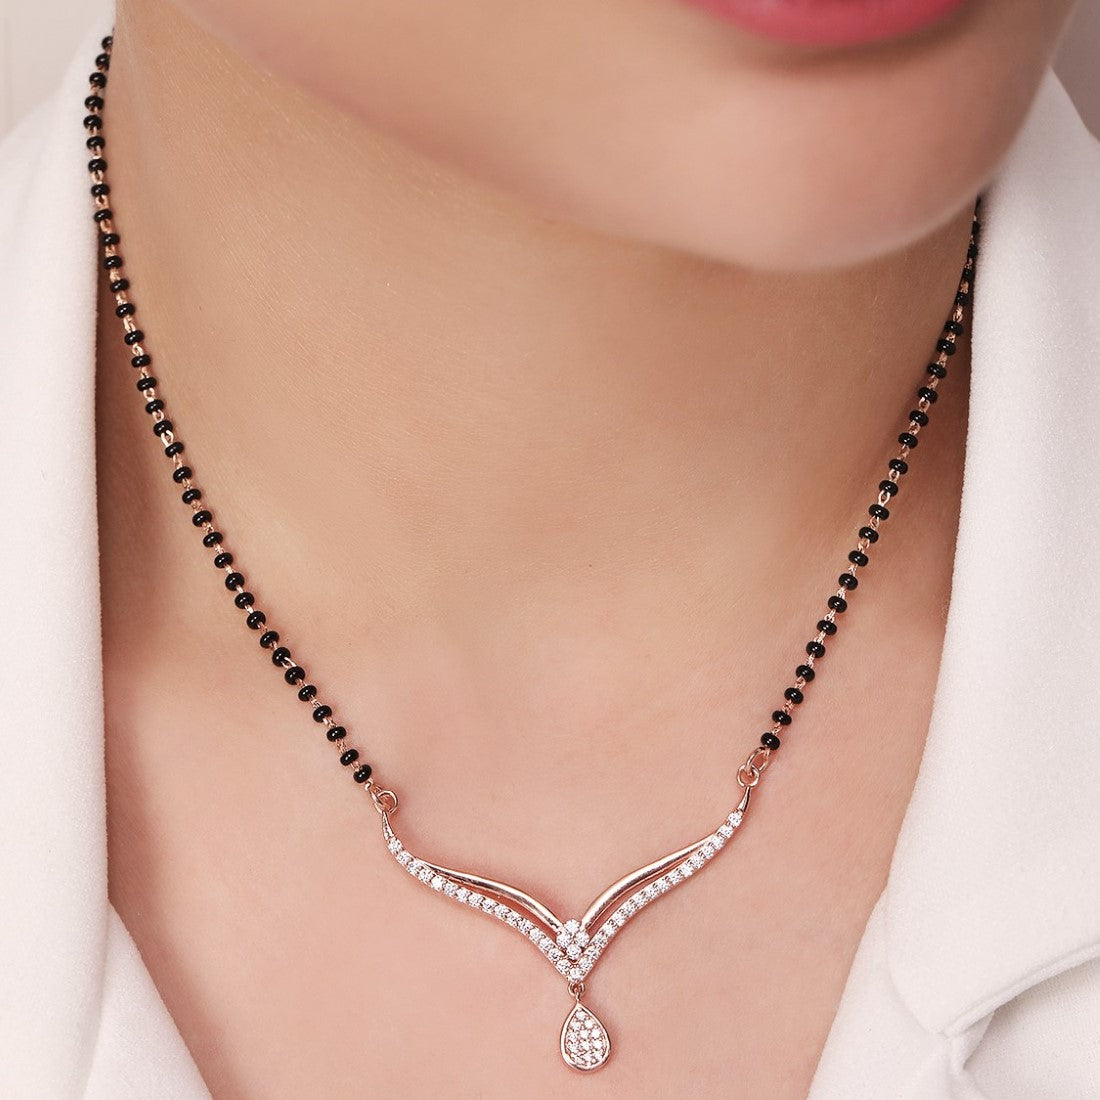 Ethereal Blossoms Rhodium-Plated 925 Sterling Silver Mangalsutra